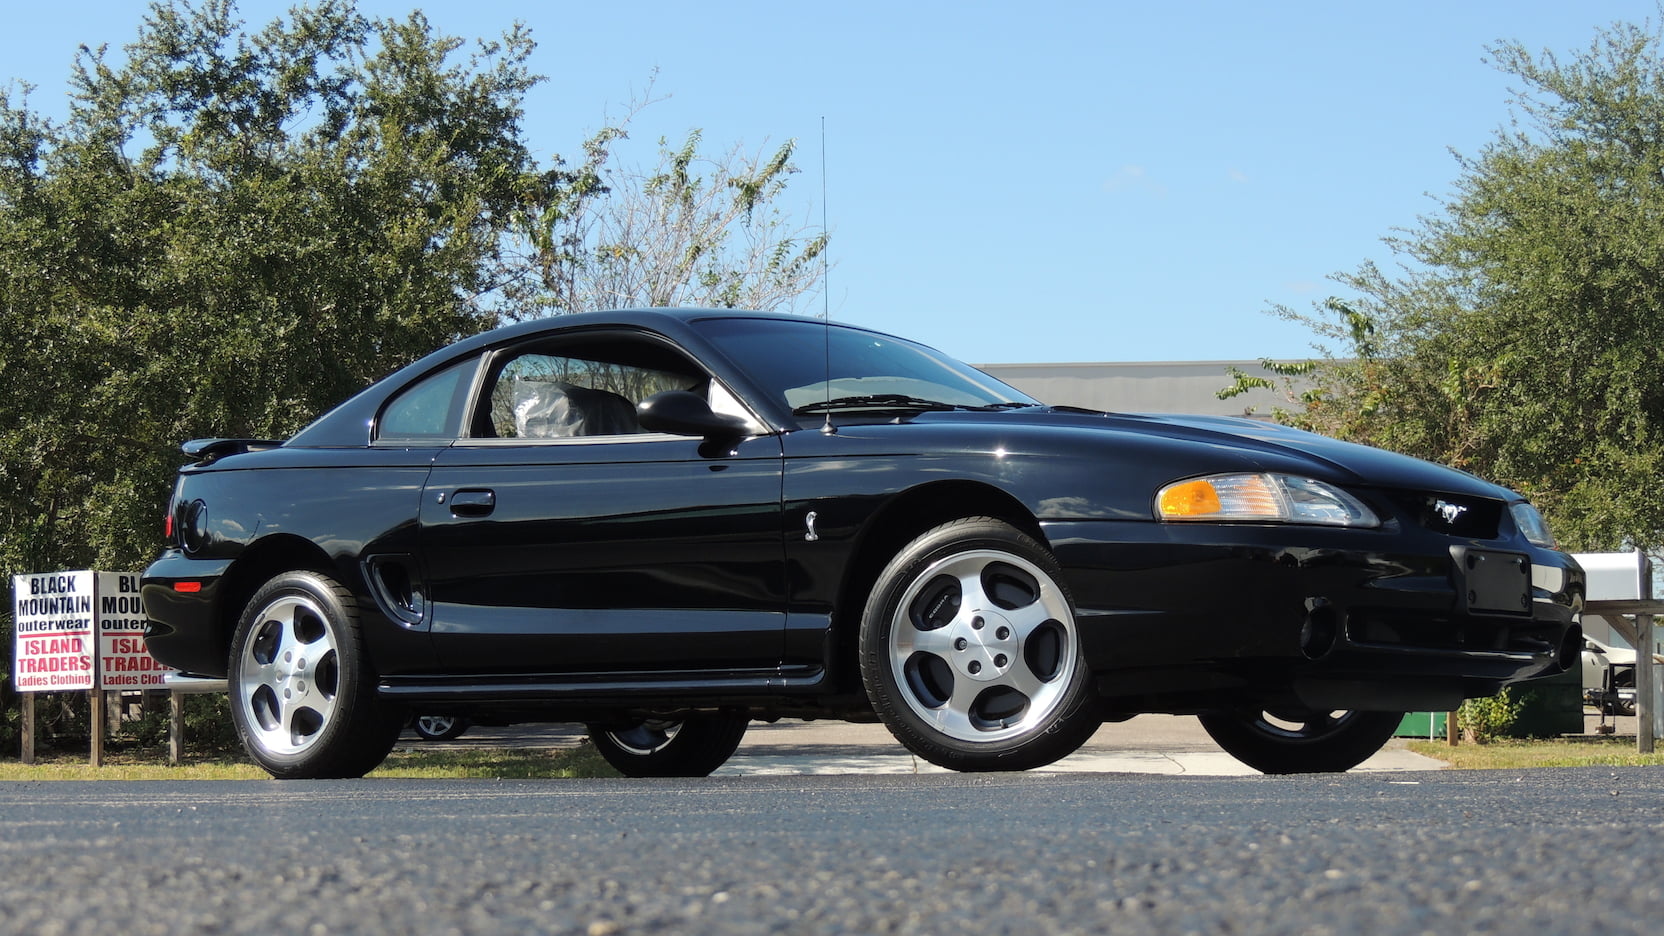 Mustang Of The Day: 1996 Ford Mustang SVT Cobra